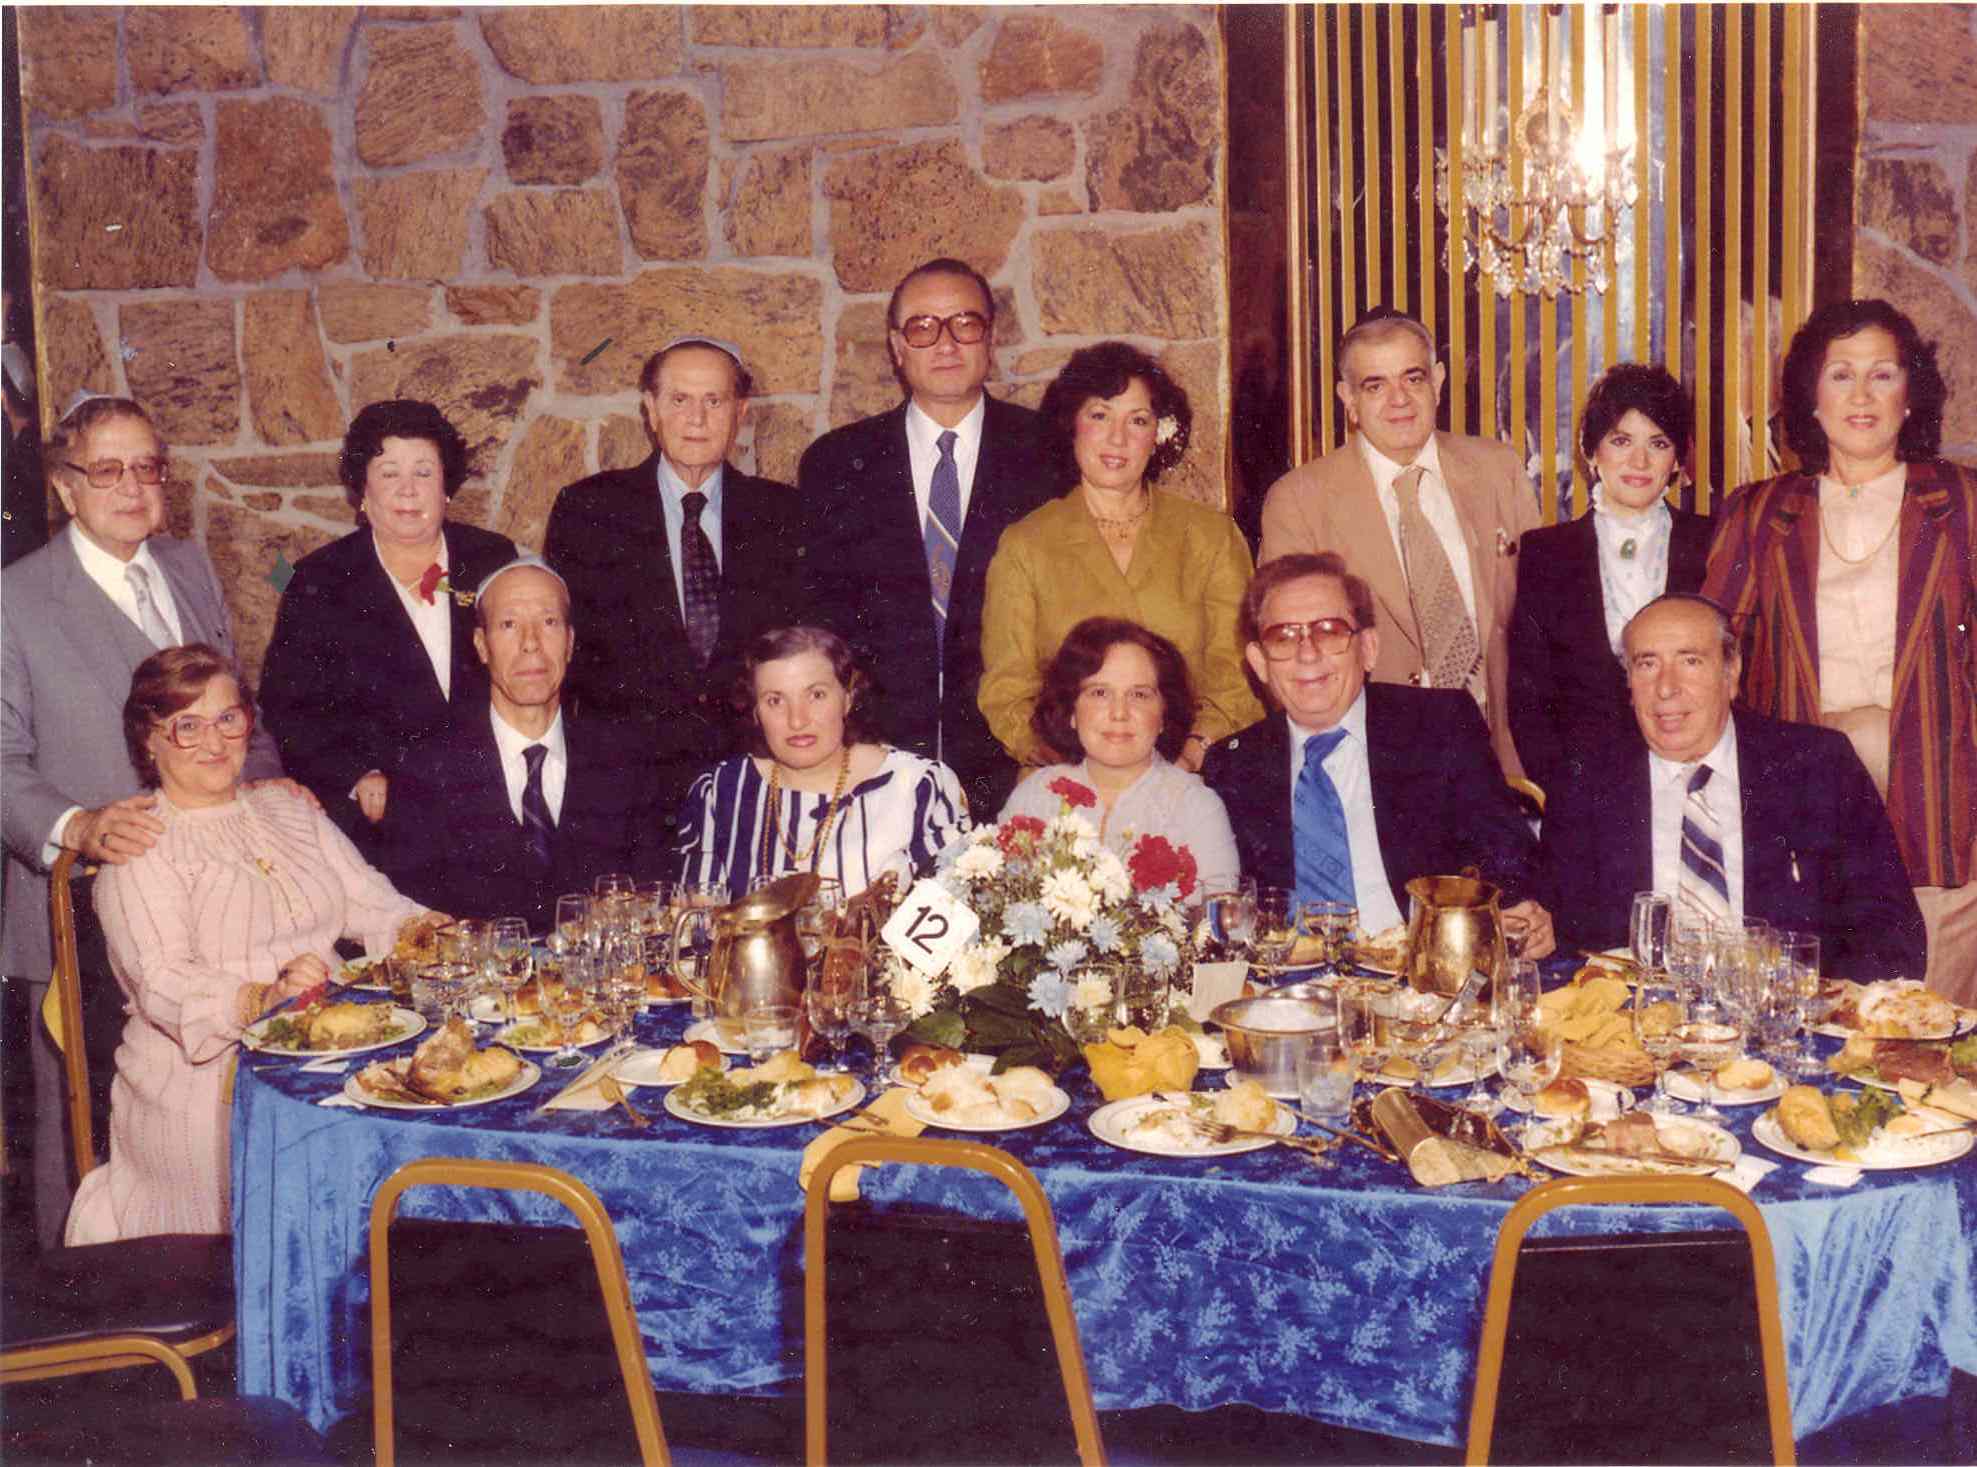 Dr. Menahem Mizrahi,wife Rita, Felix Torgueman his wife, Maurice Levy wife, Gabriele Chehebar wife standing, Zaki Salem and wife, Sasson and wife, Joseph Barnathan and wife at a function in 1975. 